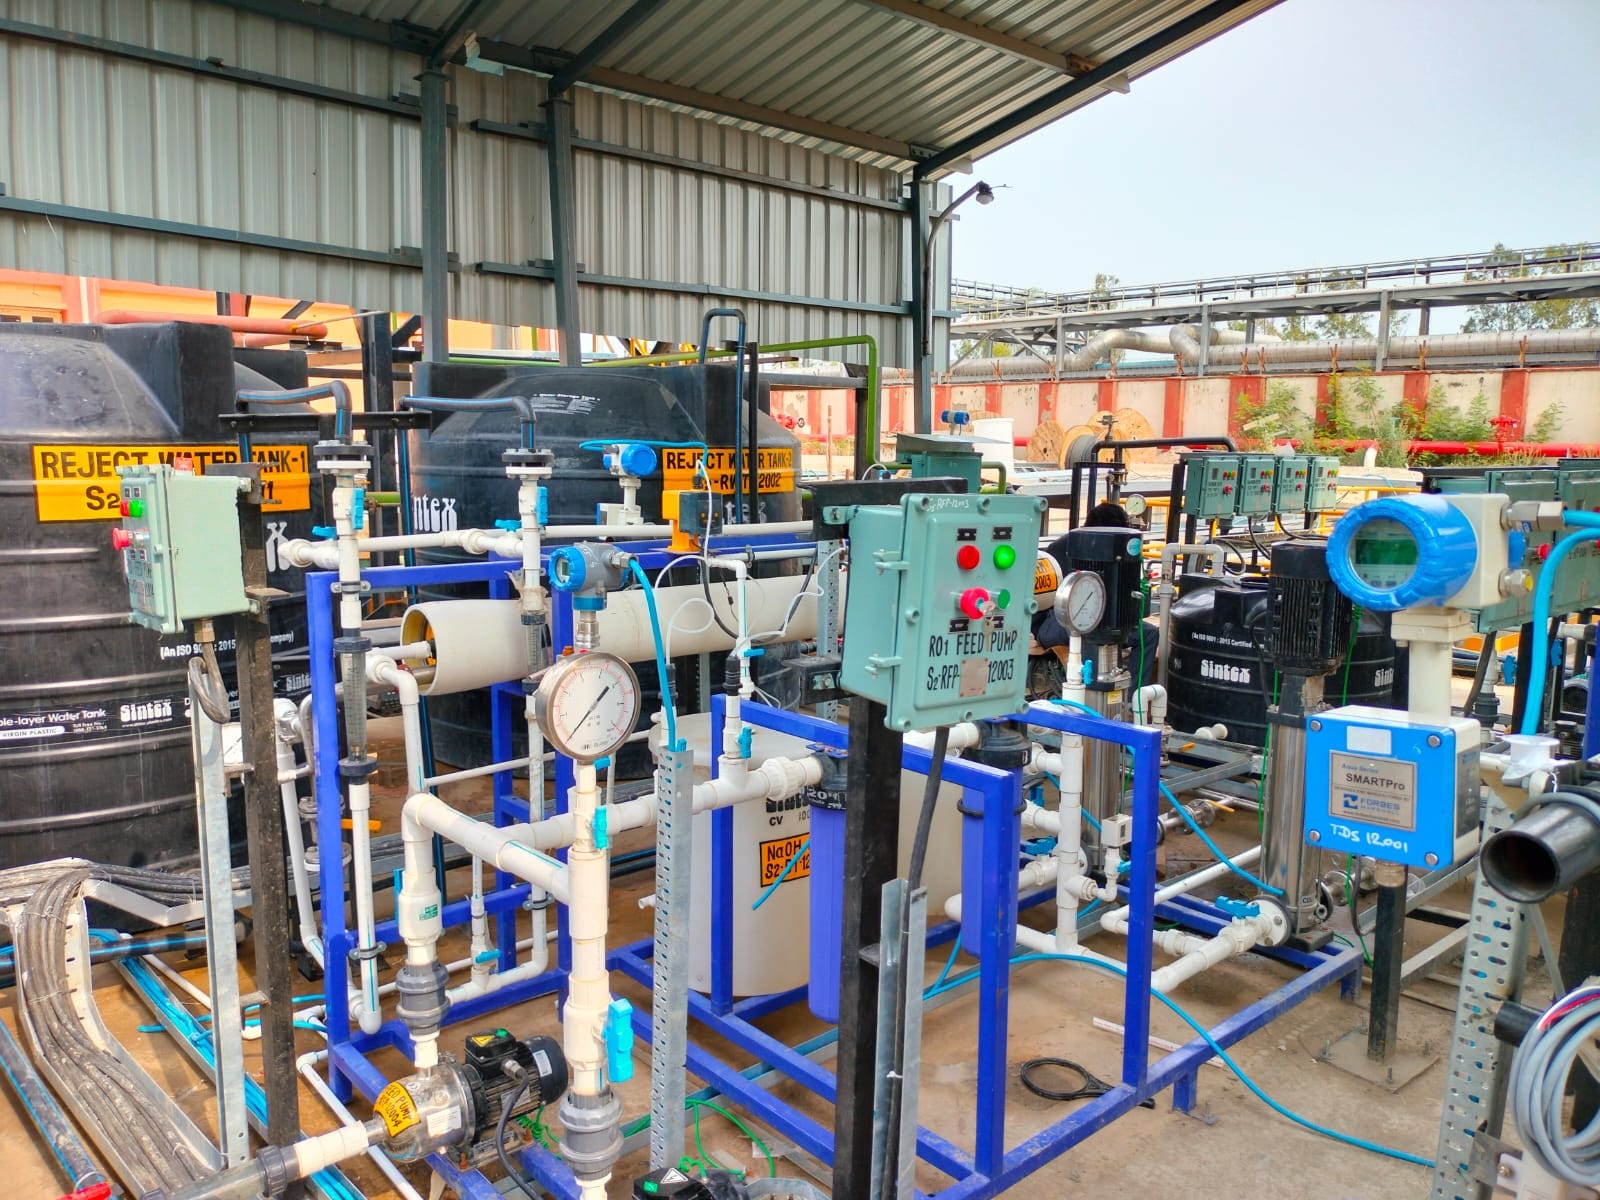  Seawater Desalination Systems / Seawater RO (Reverse Osmosis) Systems / Containerized RO Seawater Plants / Systems